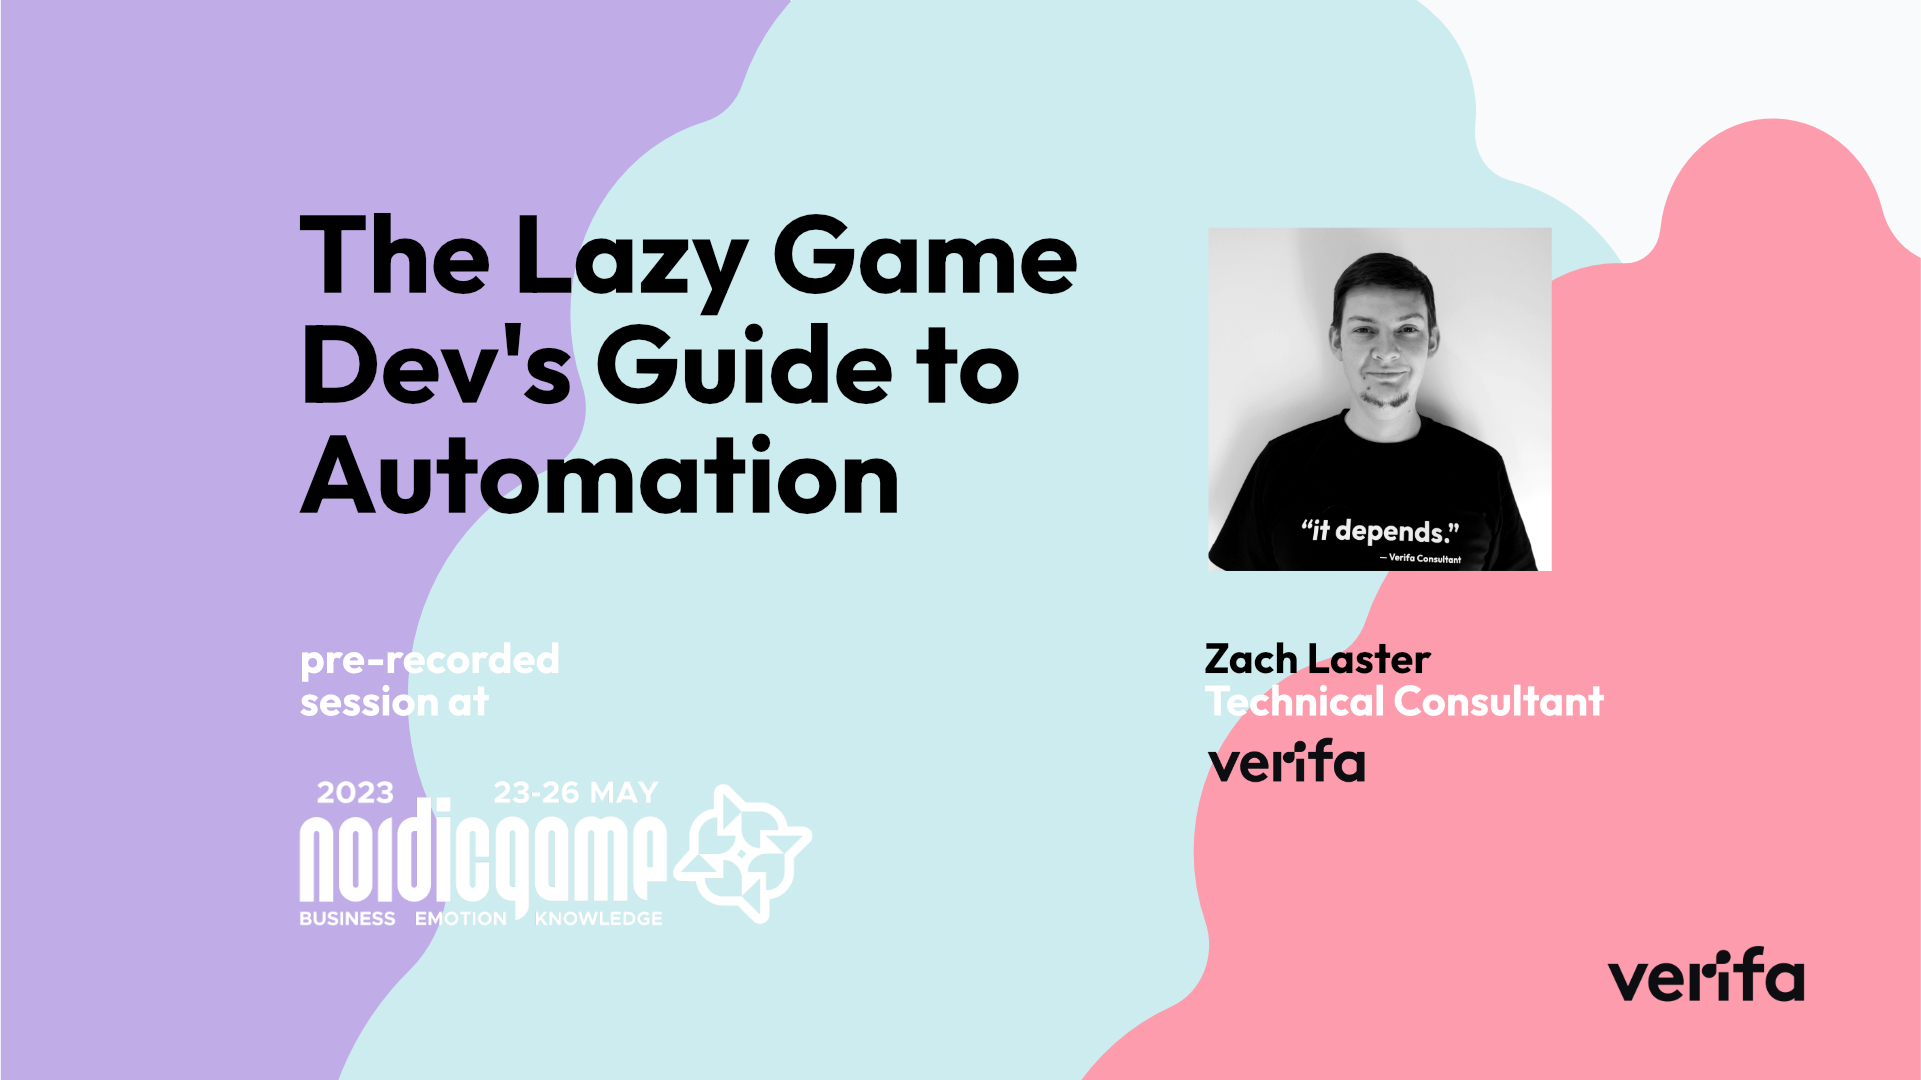 The Lazy Game Dev's Guide to Automation